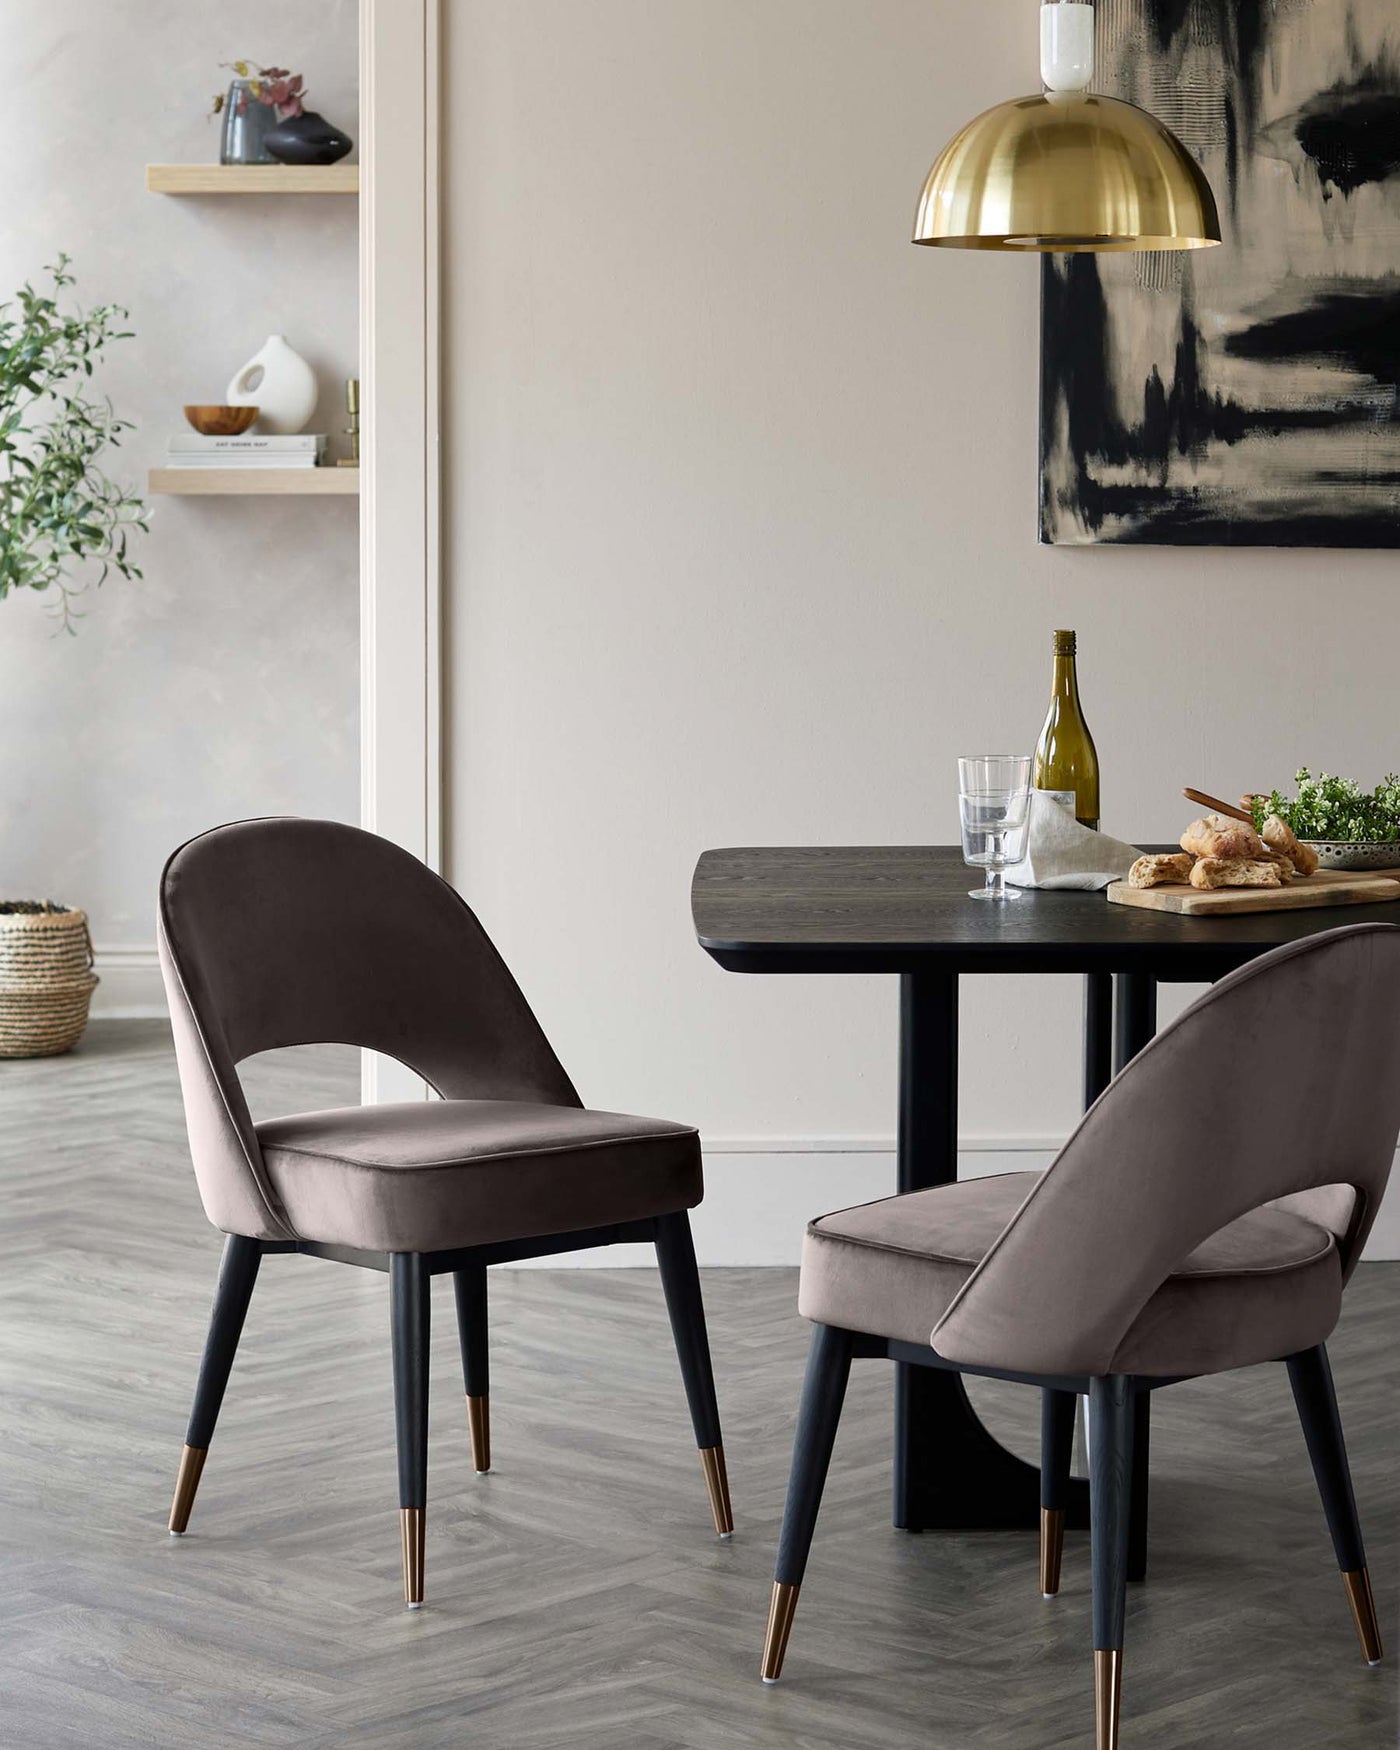 A modern dining set featuring two plush, mauve upholstered chairs with black legs accented with gold tips, surrounding a dark-stained wooden table. The setting is complemented by a large brass-domed pendant light overhead and minimalistic shelf decor against a neutral wall.